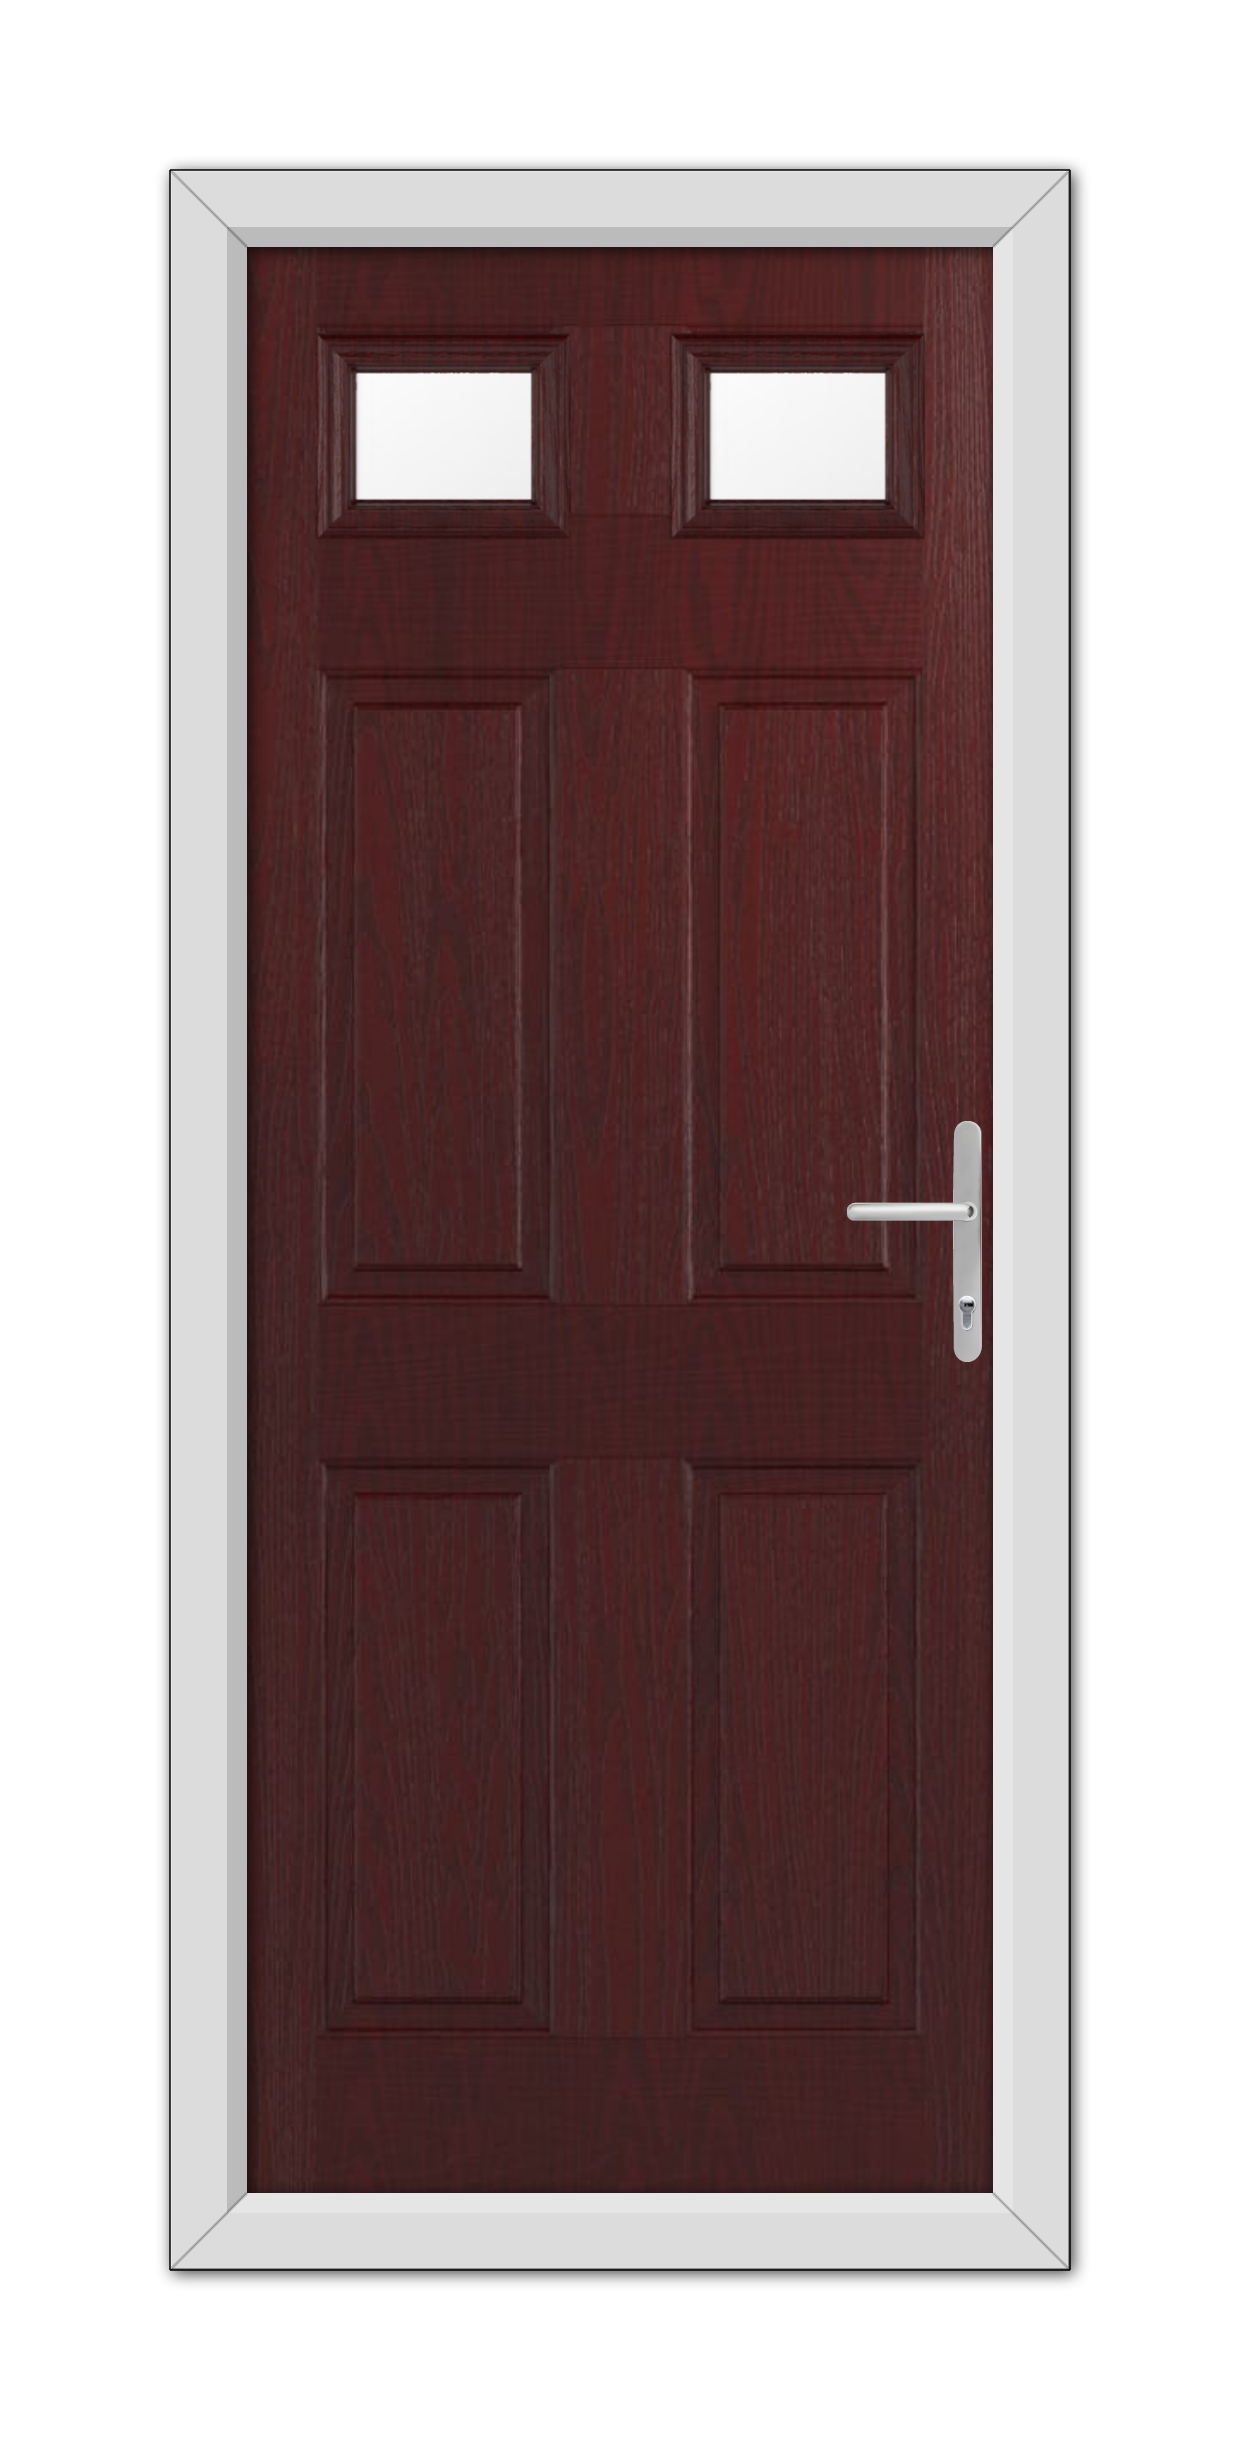 A Rosewood Middleton Glazed 2 Composite Door 48mm Timber Core with two square windows at the top and a silver handle, set in a white frame.